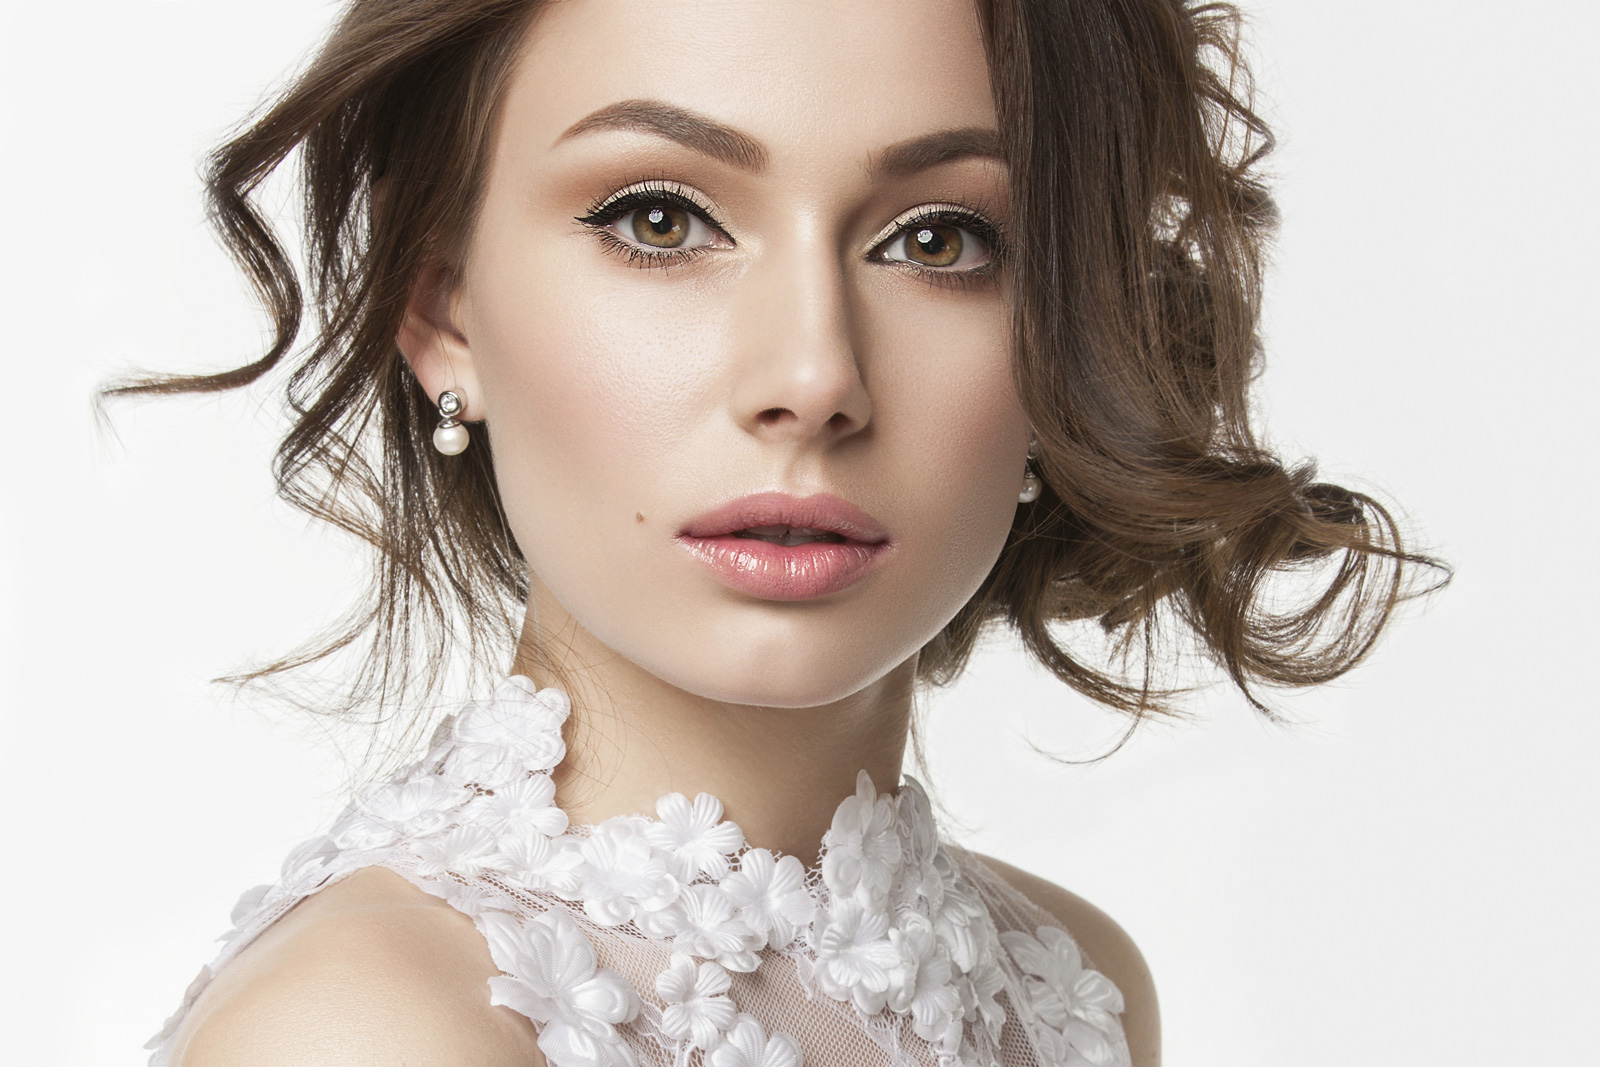 Classic Looks by Blende Beauty Makeup Artists